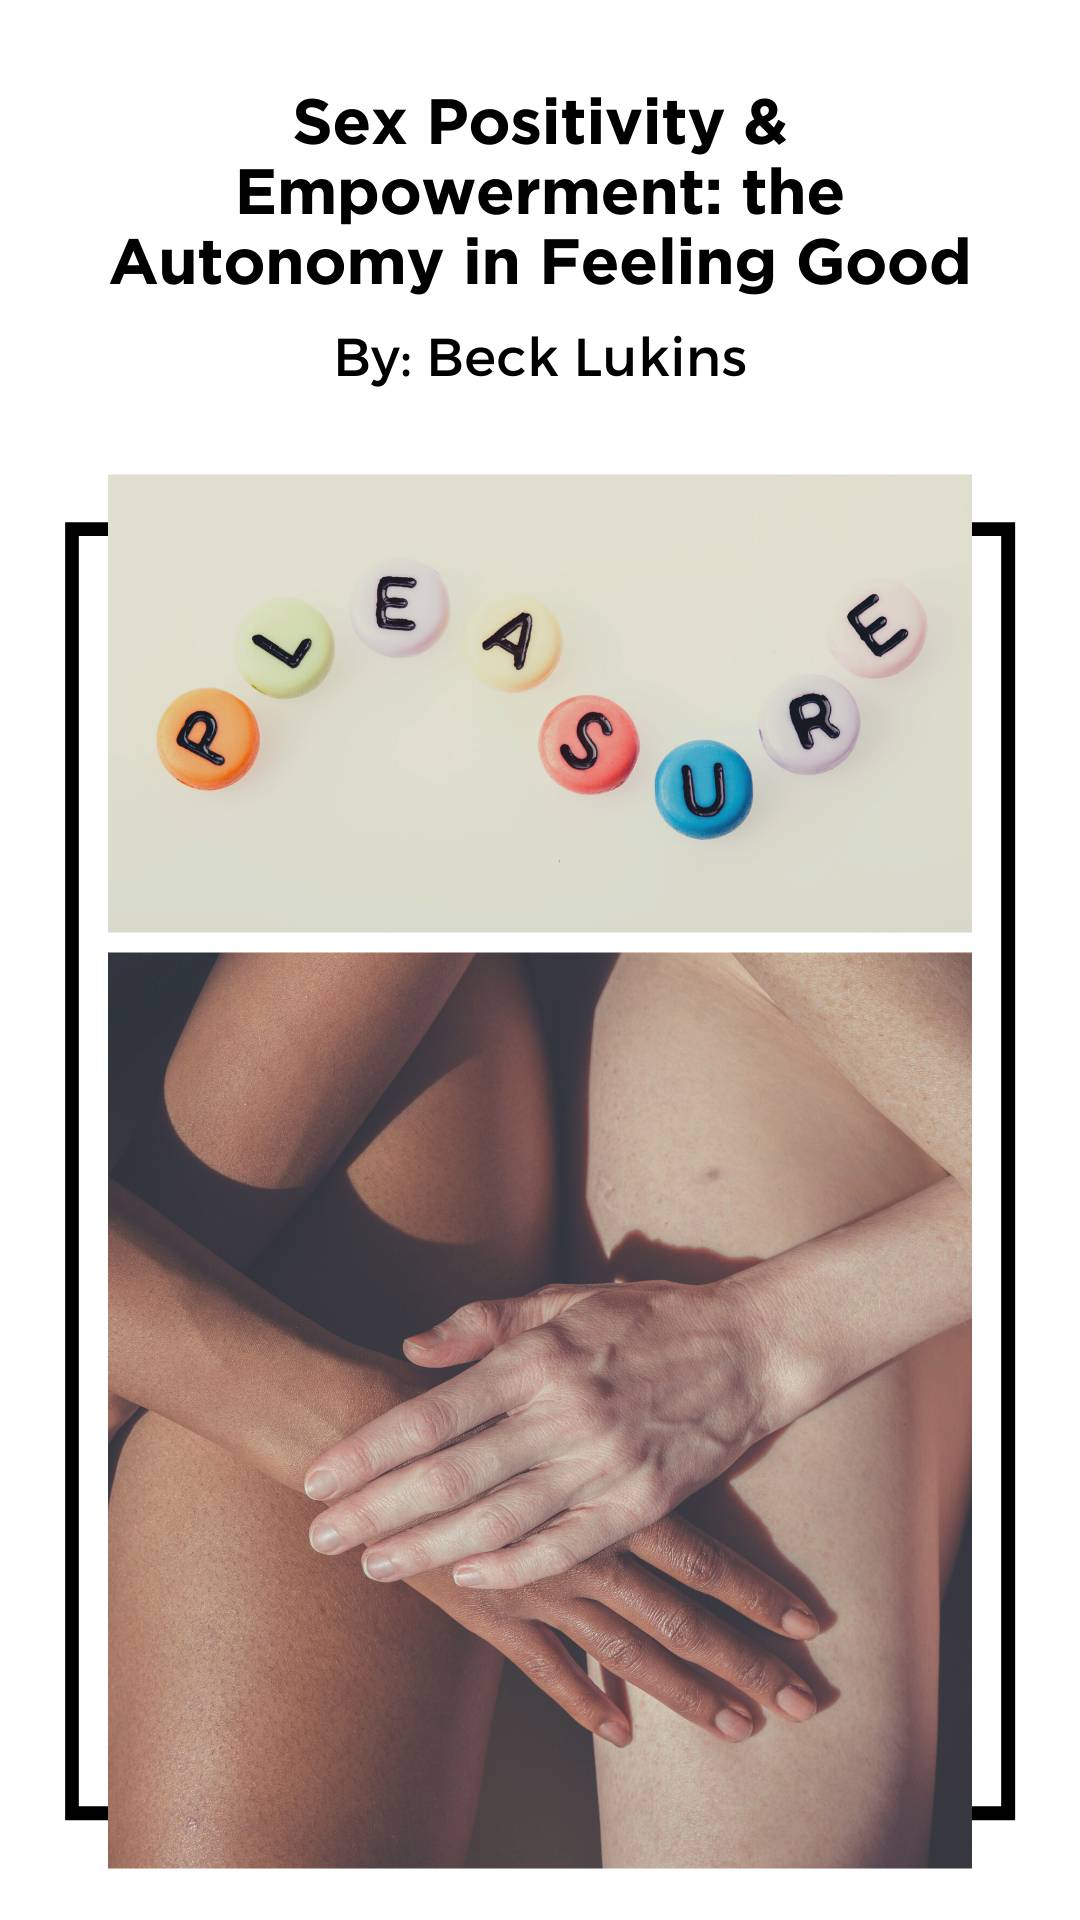 Image of a title page that says "Sex Positivity and Empowerment: the Autonomy in Feeling Good" By Beck Lukins with an image of the word pleasure spelt out with letter beads, as well as two people sitting next to each other crossing arms to each leg.